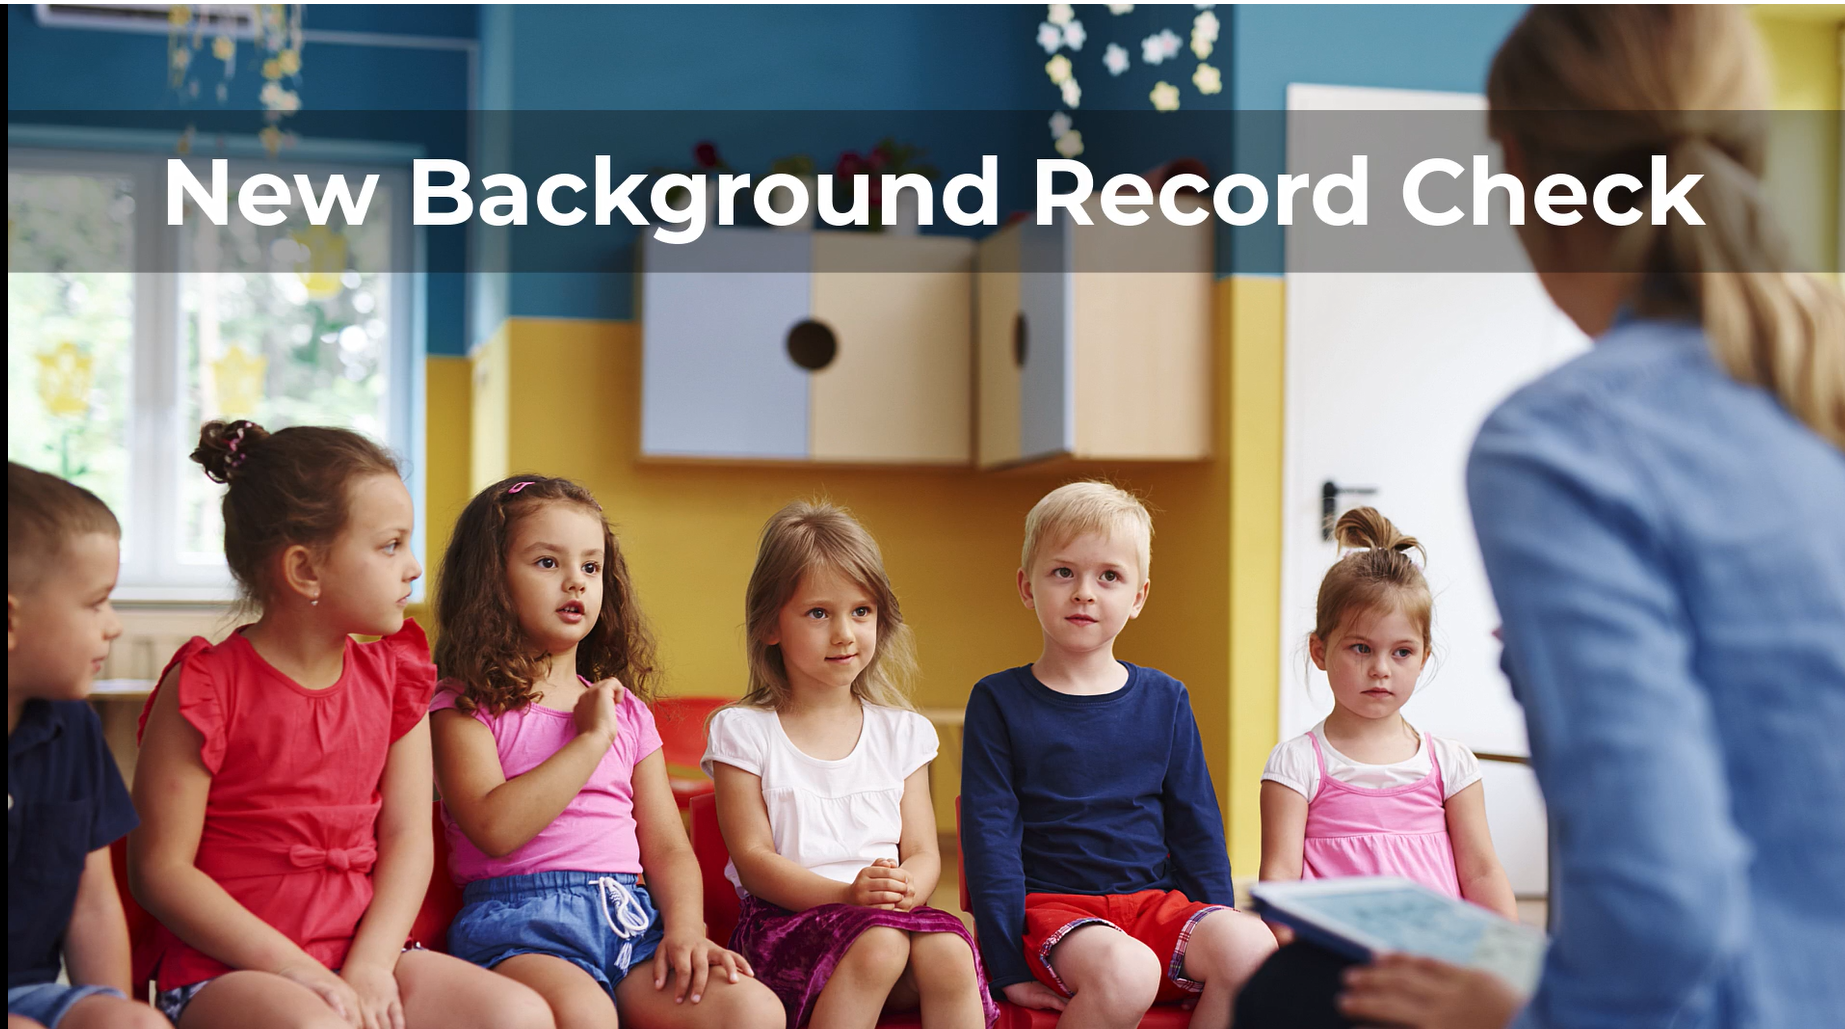 Child Care Licensing Background Record Check Overview video thumbnail